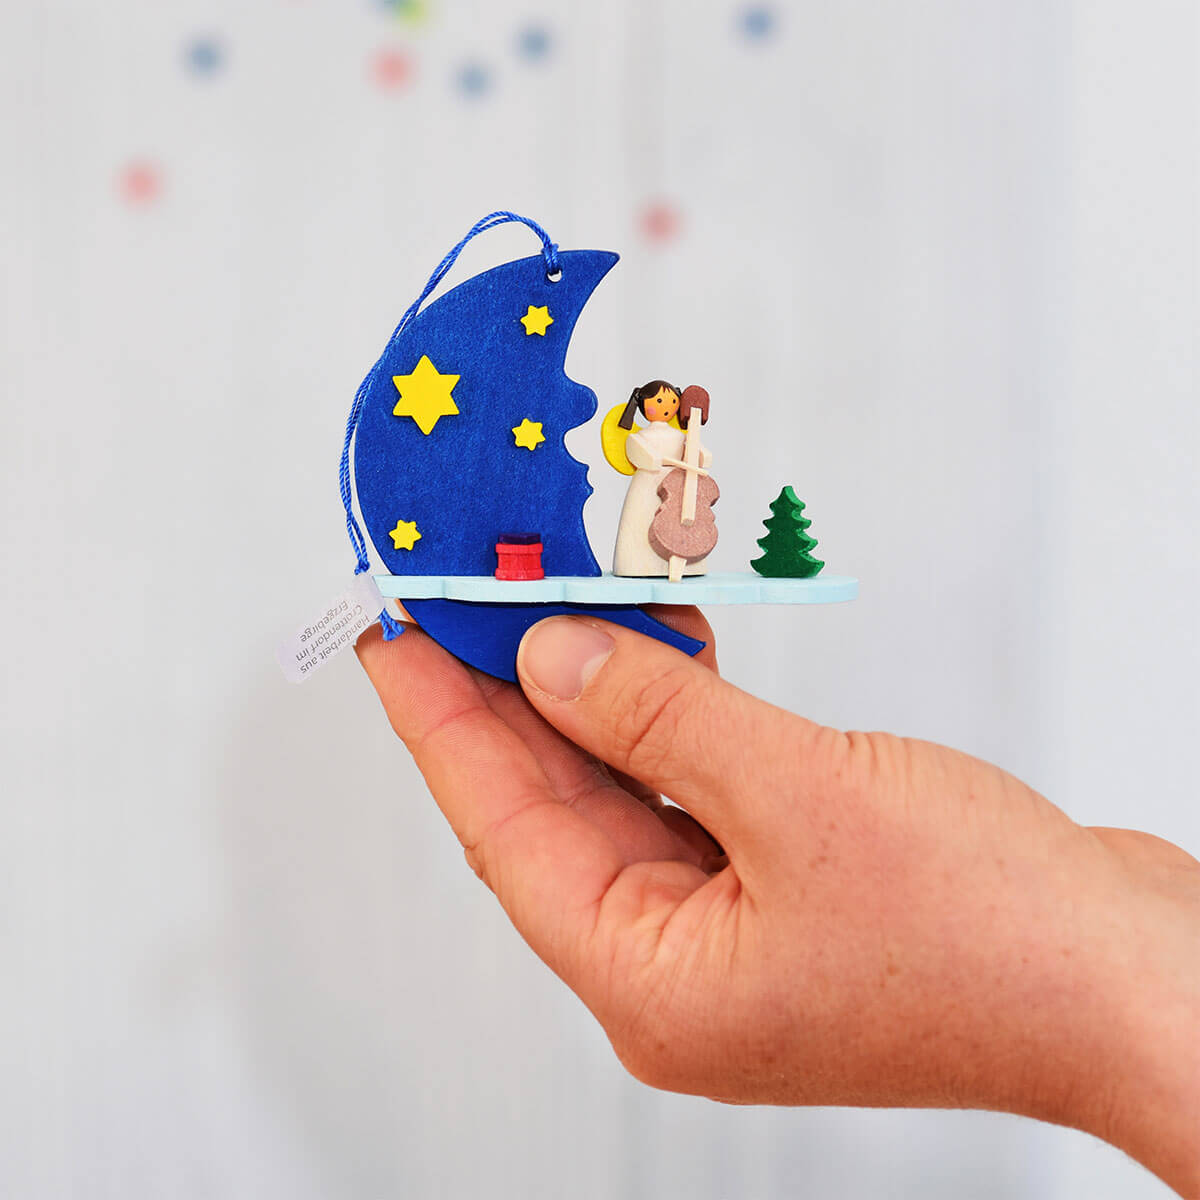 Moon & Cloud 'Angel' Ornament with toy box